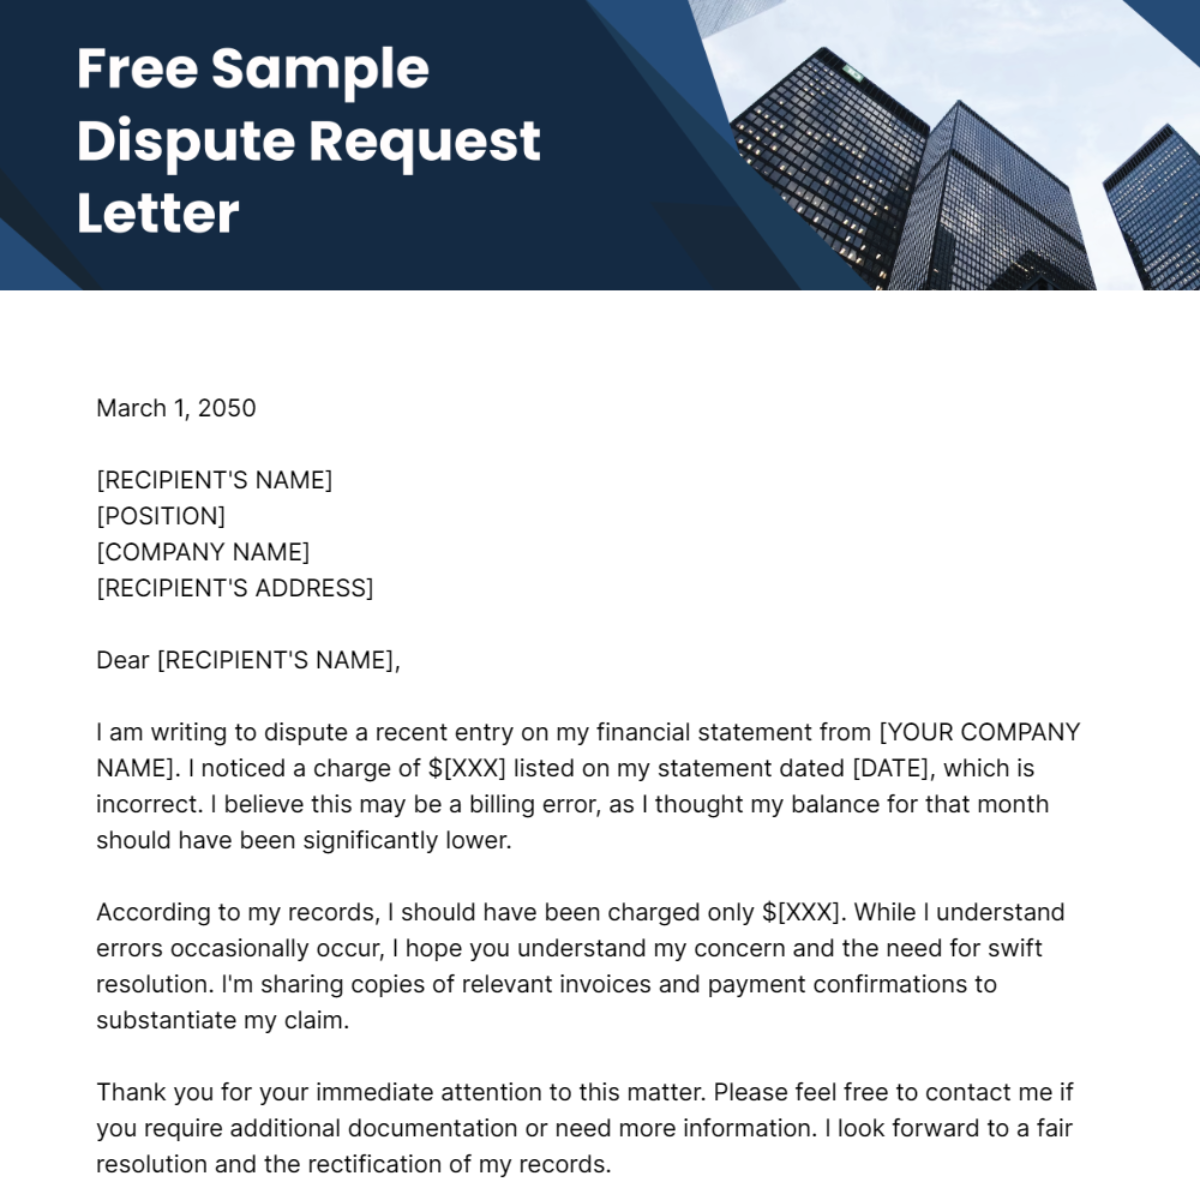 Sample Dispute Request Letter Template